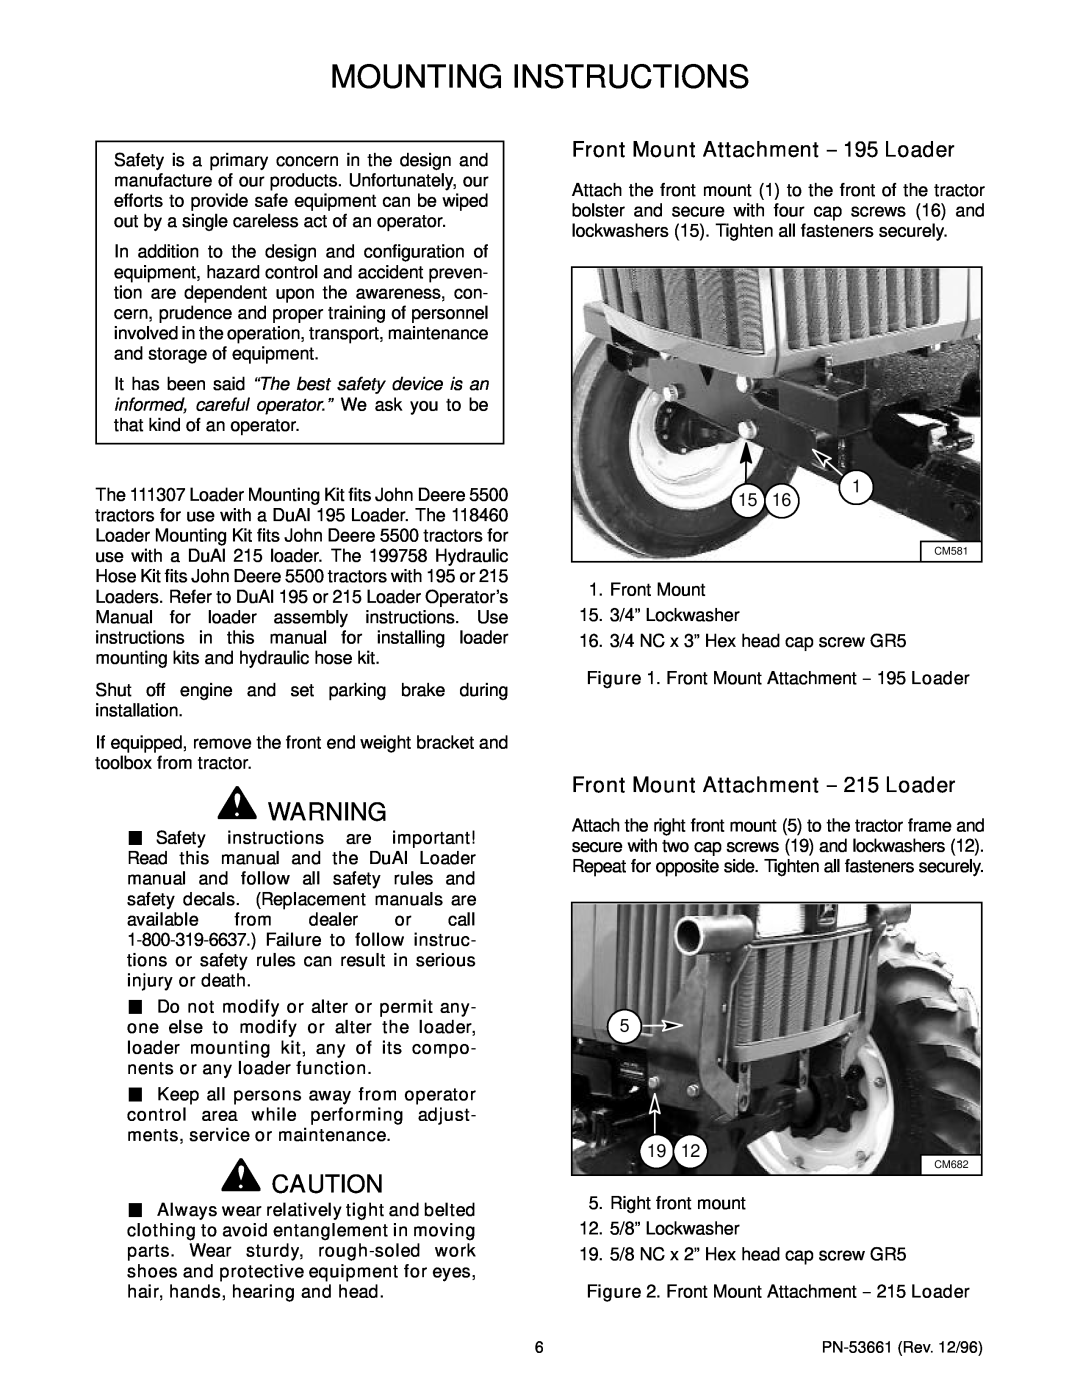 Woods Equipment 118460 Mounting Instructions, Front Mount Attachment -- 195 Loader, Front Mount Attachment -- 215 Loader 